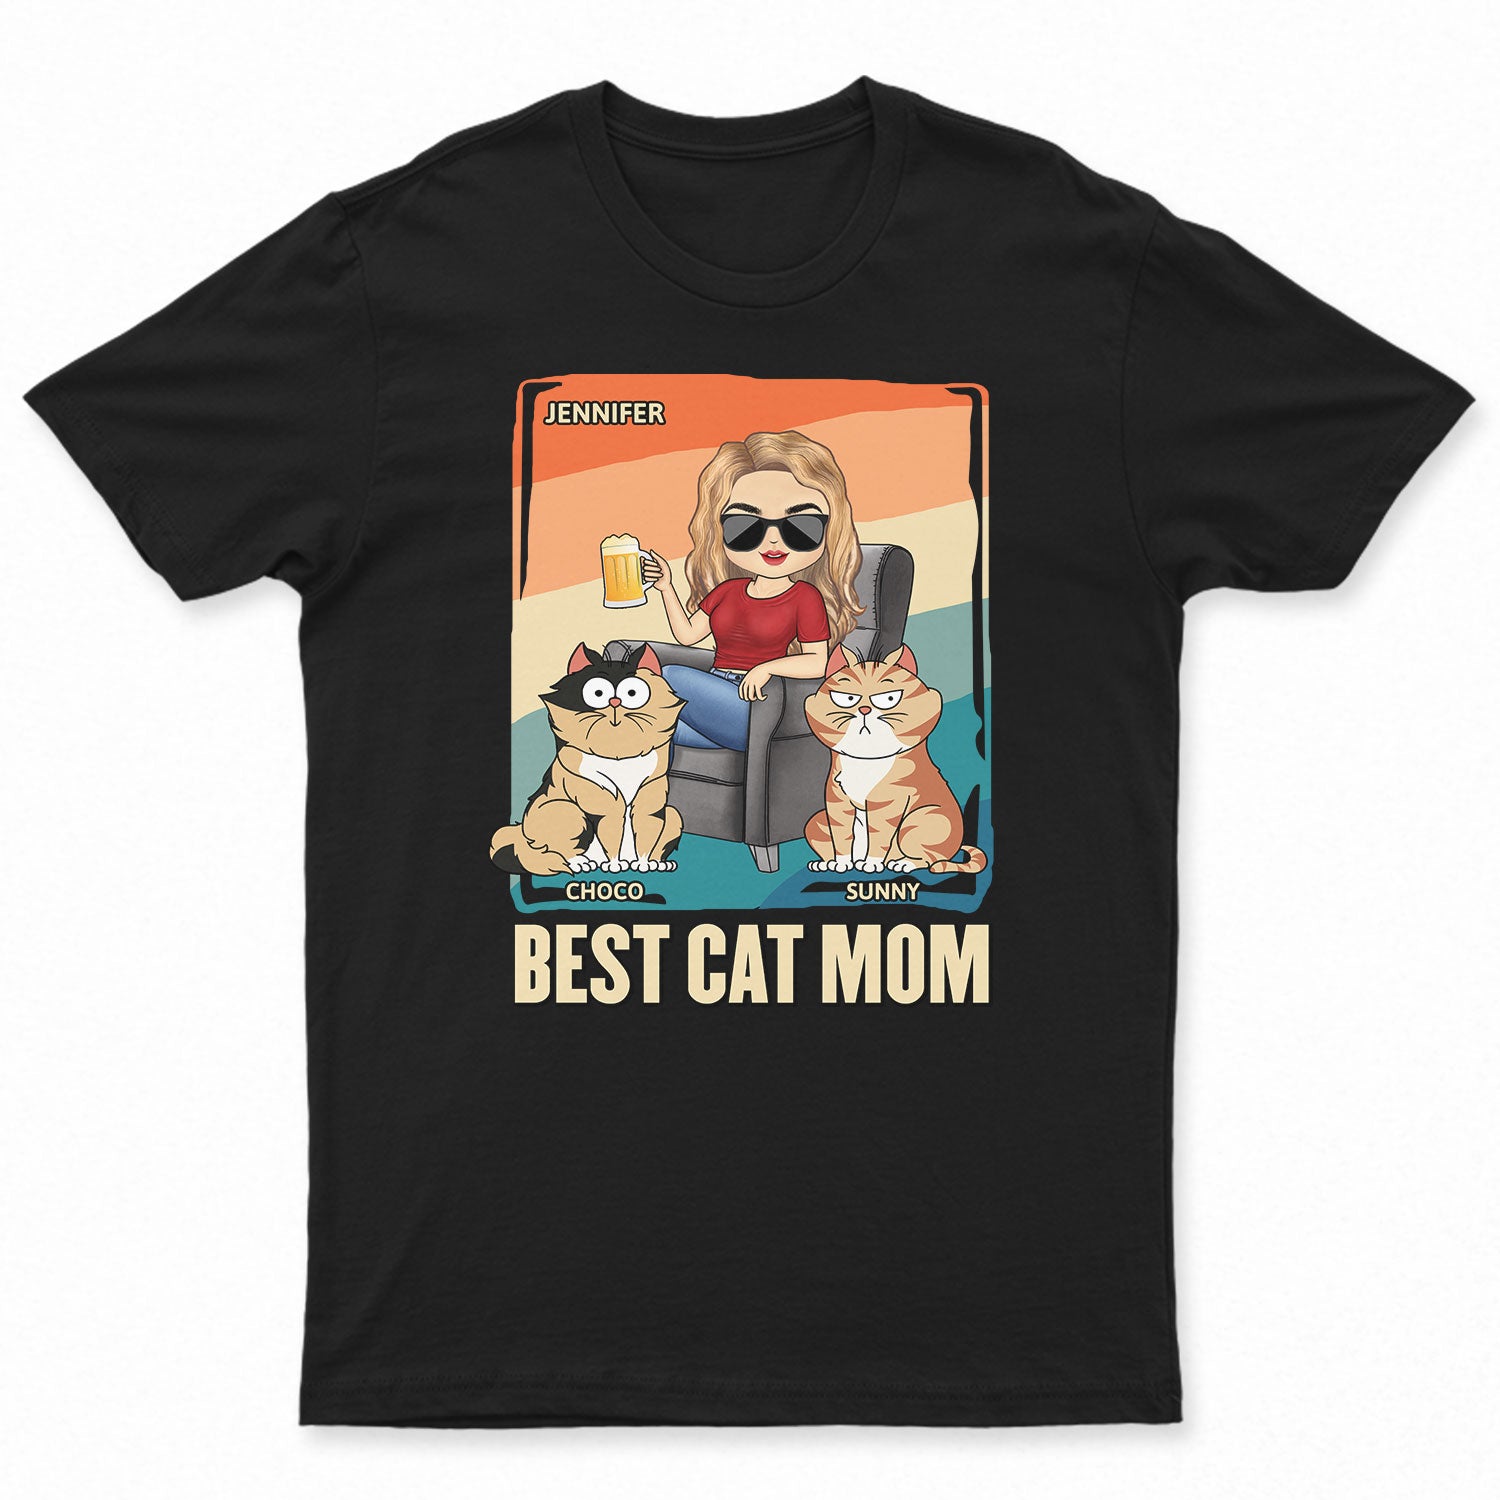 Best Cat Mom The Cat Mother - Birthday, Loving Gift For Cat Lovers - Personalized T Shirt